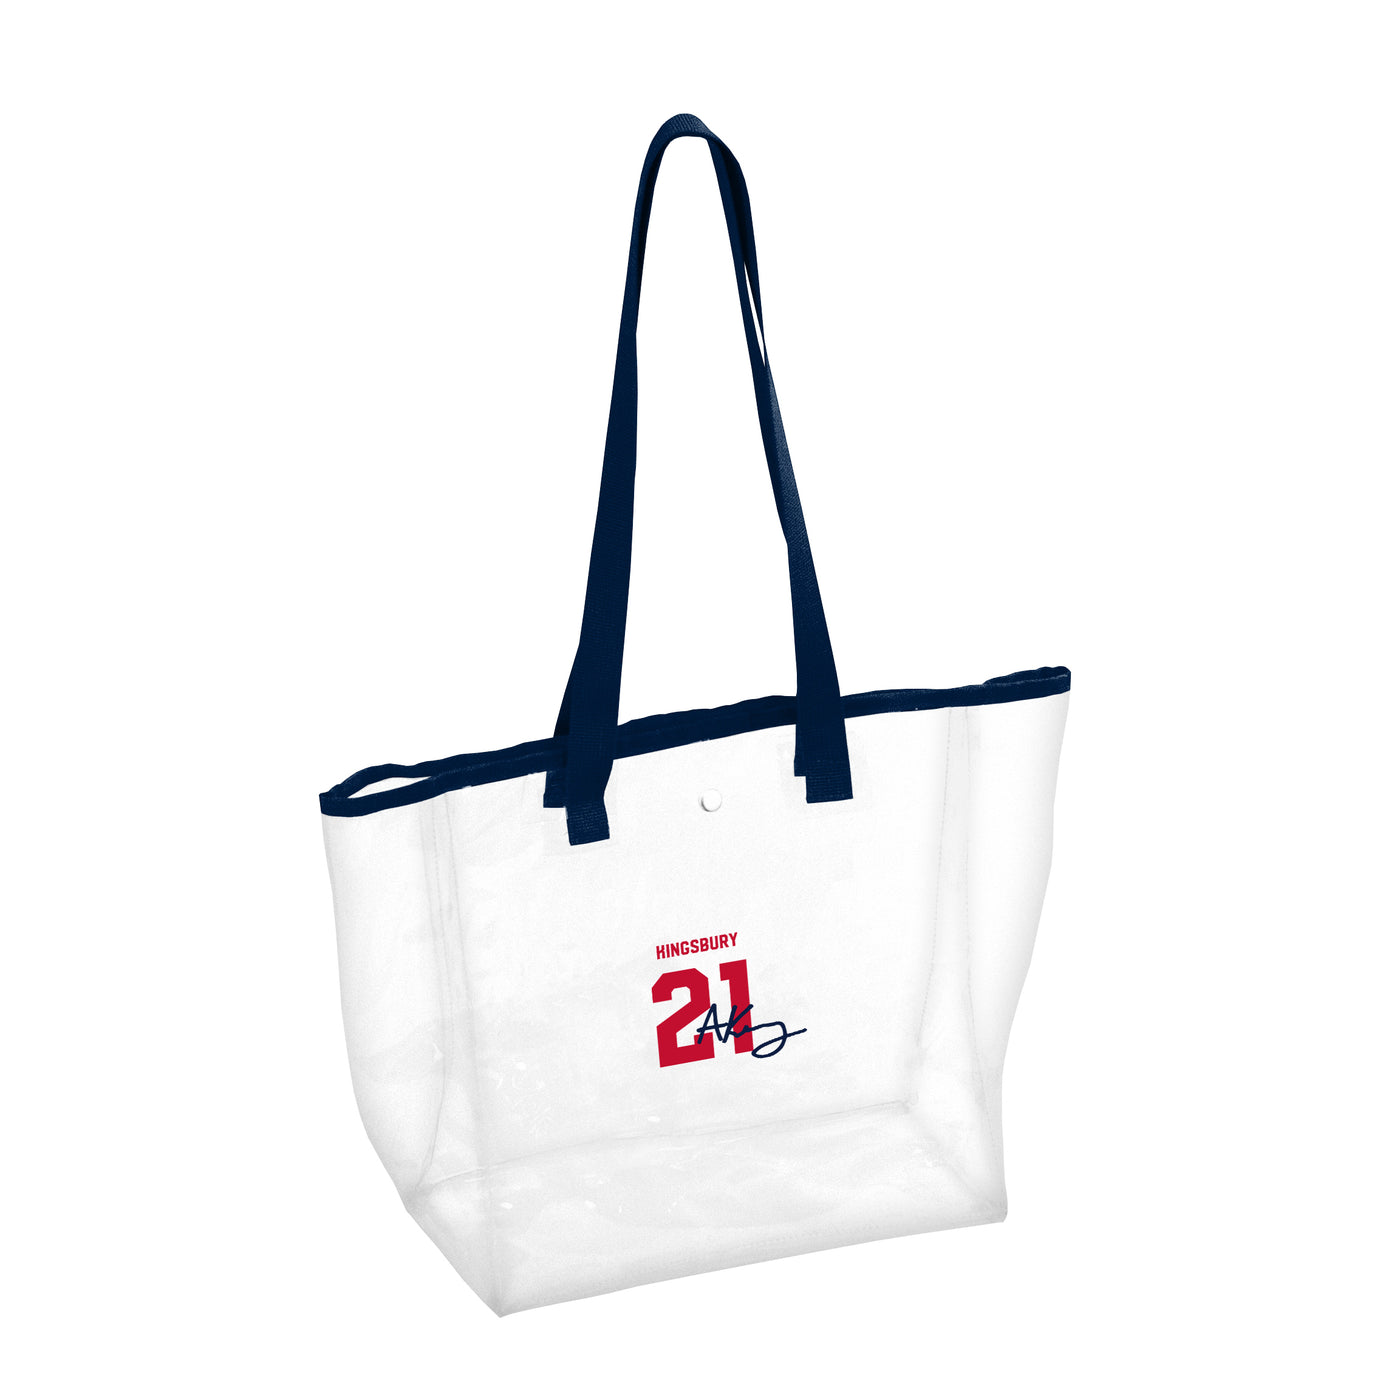 US Womens National Team Audrey Kingsbury Clear Tote